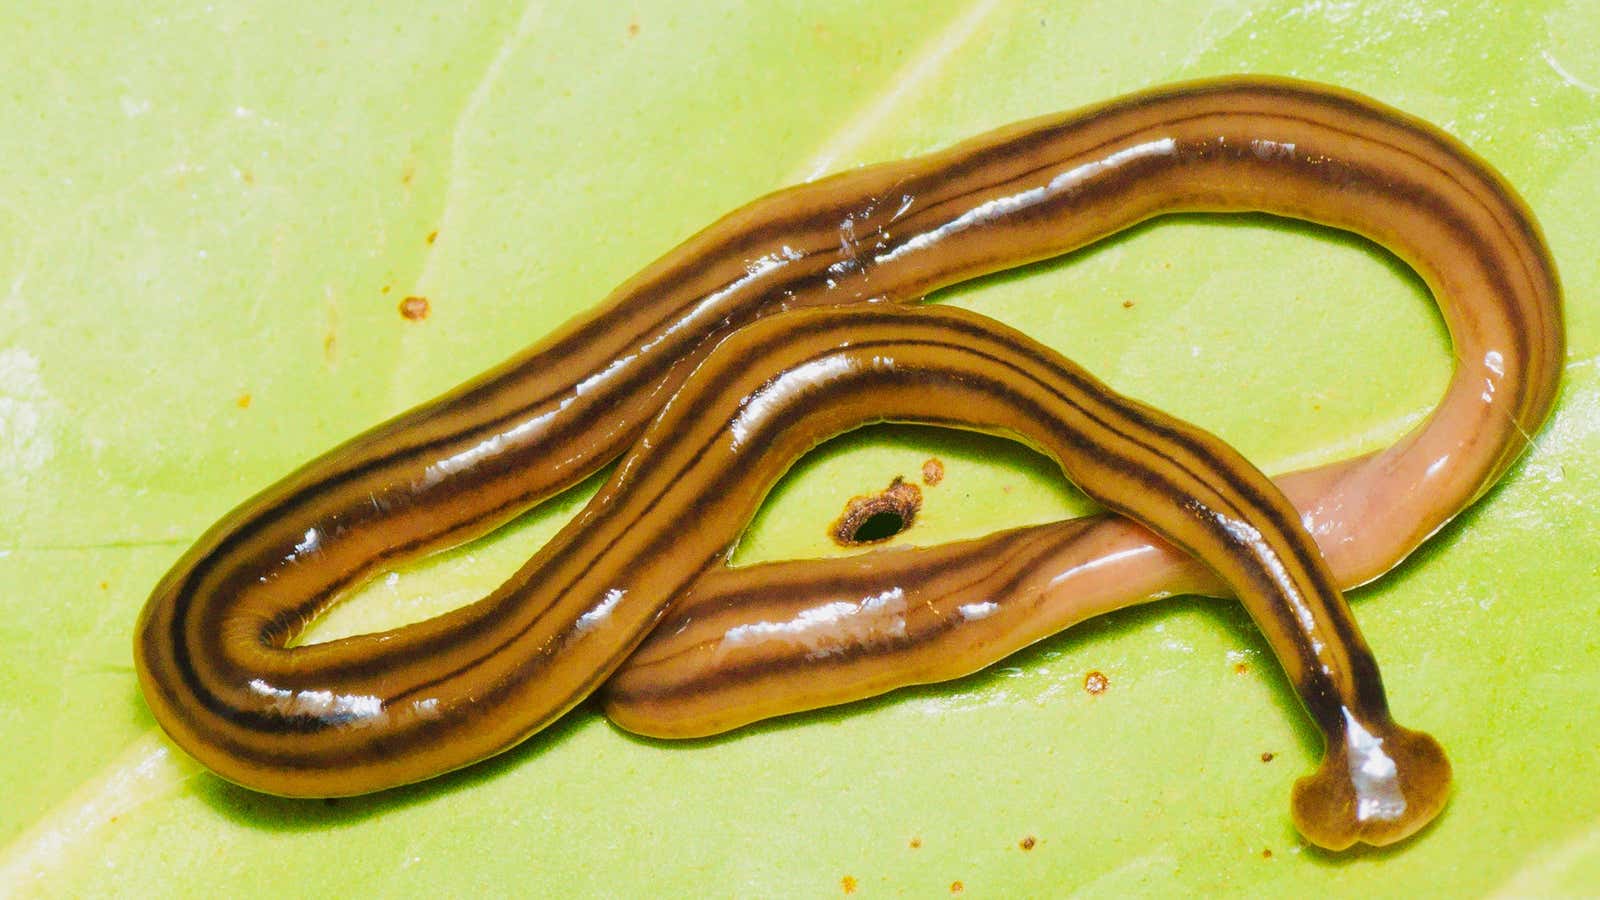 Giant predatory worms from Asia are invading France